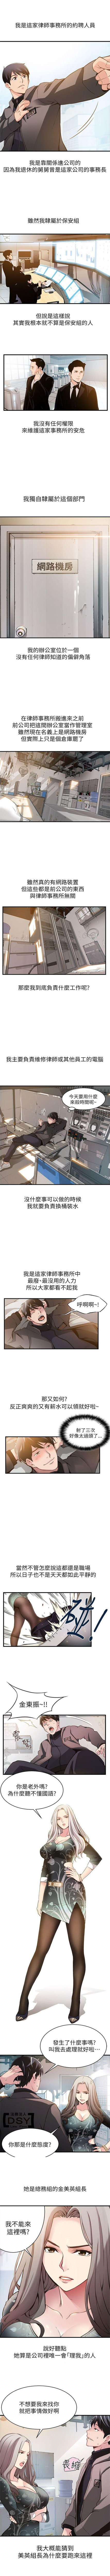 Teentube 弱點 1-91 官方中文（連載中） Mouth - Page 5